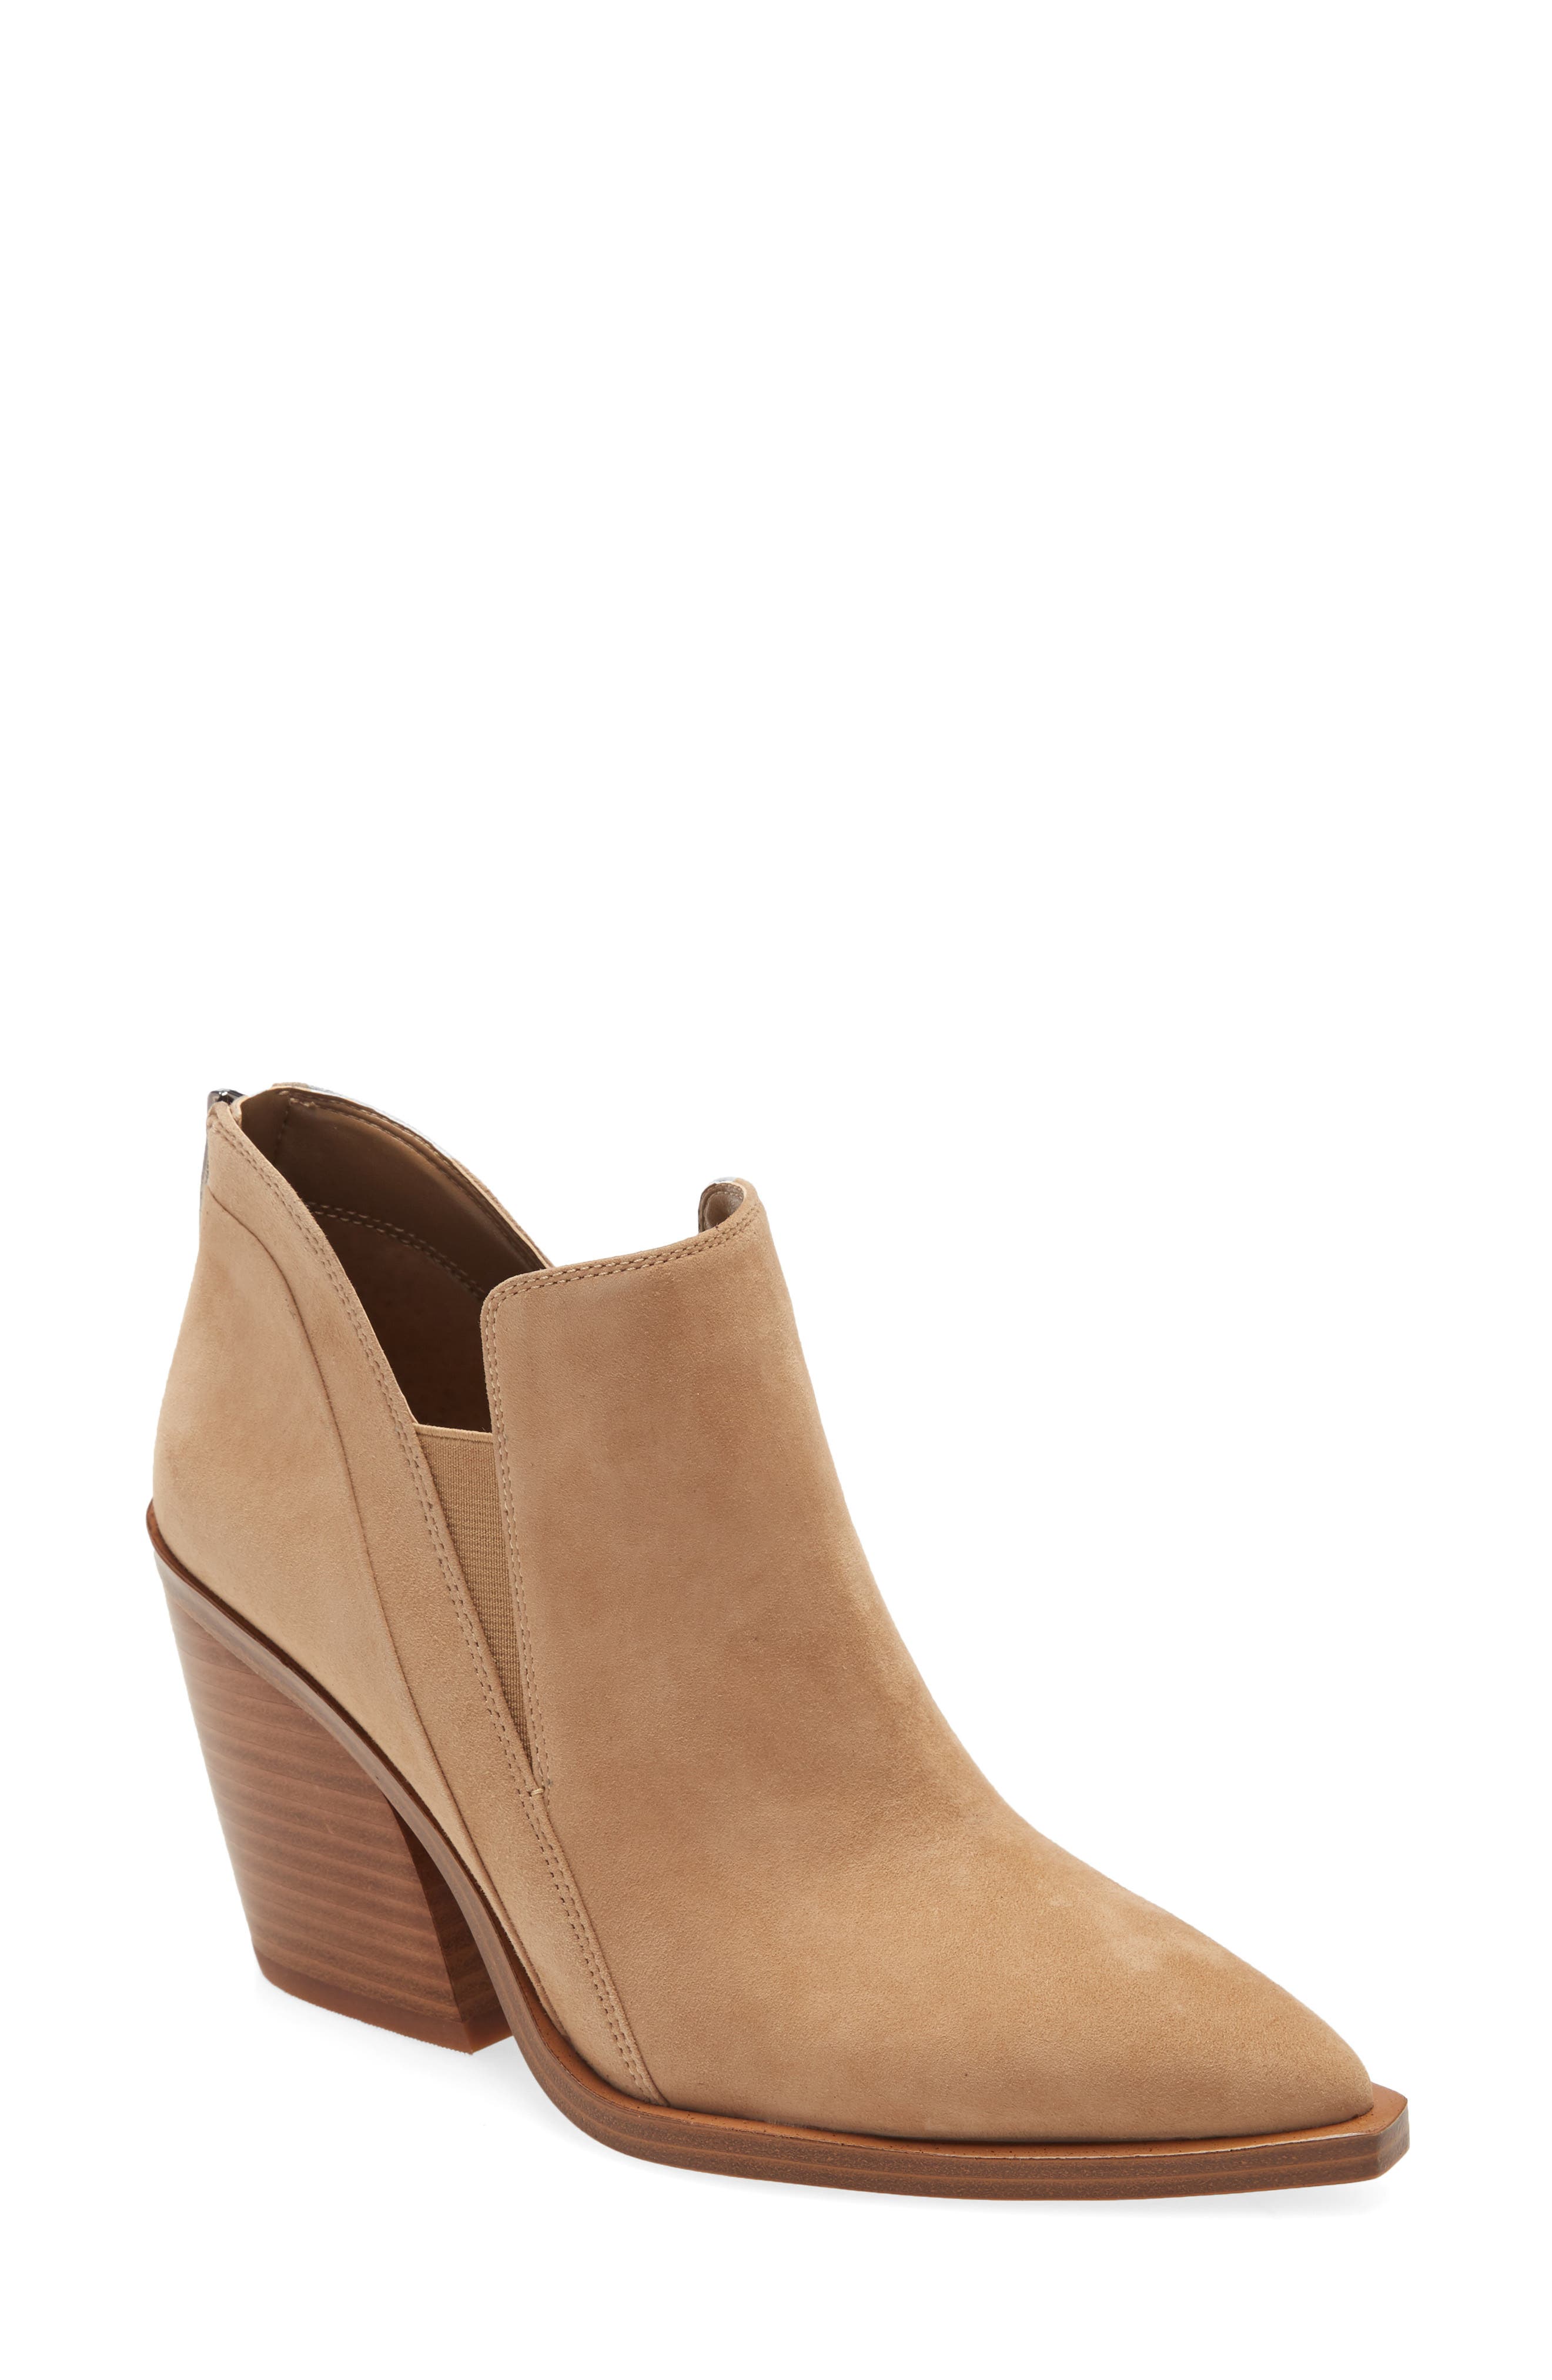 Women's Vince Camuto Booties \u0026 Ankle 